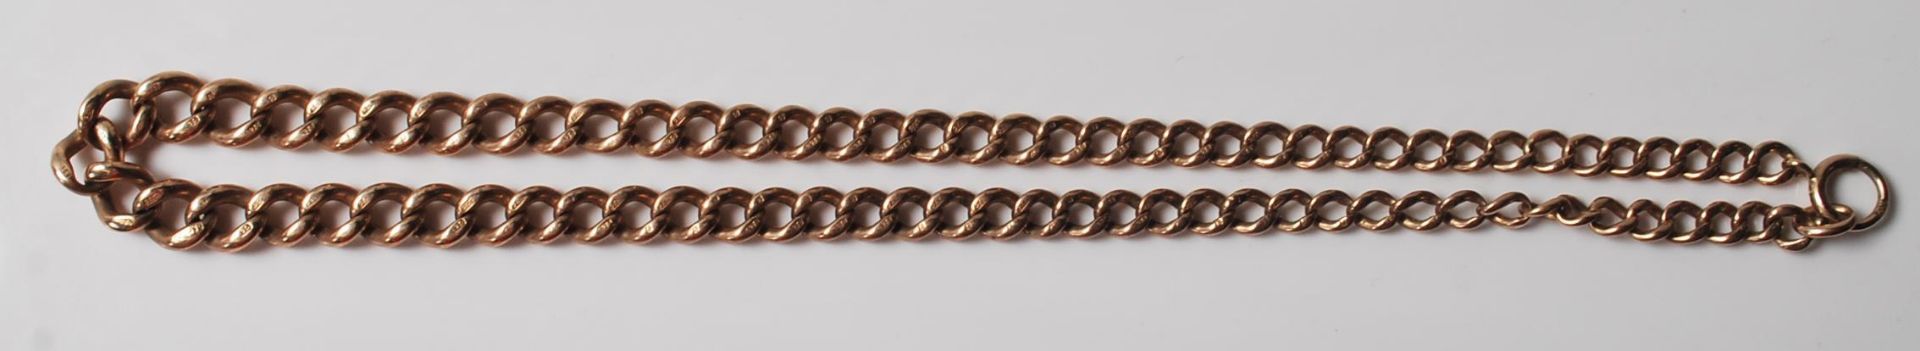 VICTORIAN 9CT GOLD CURB LINK POCKET WATCH CHAIN